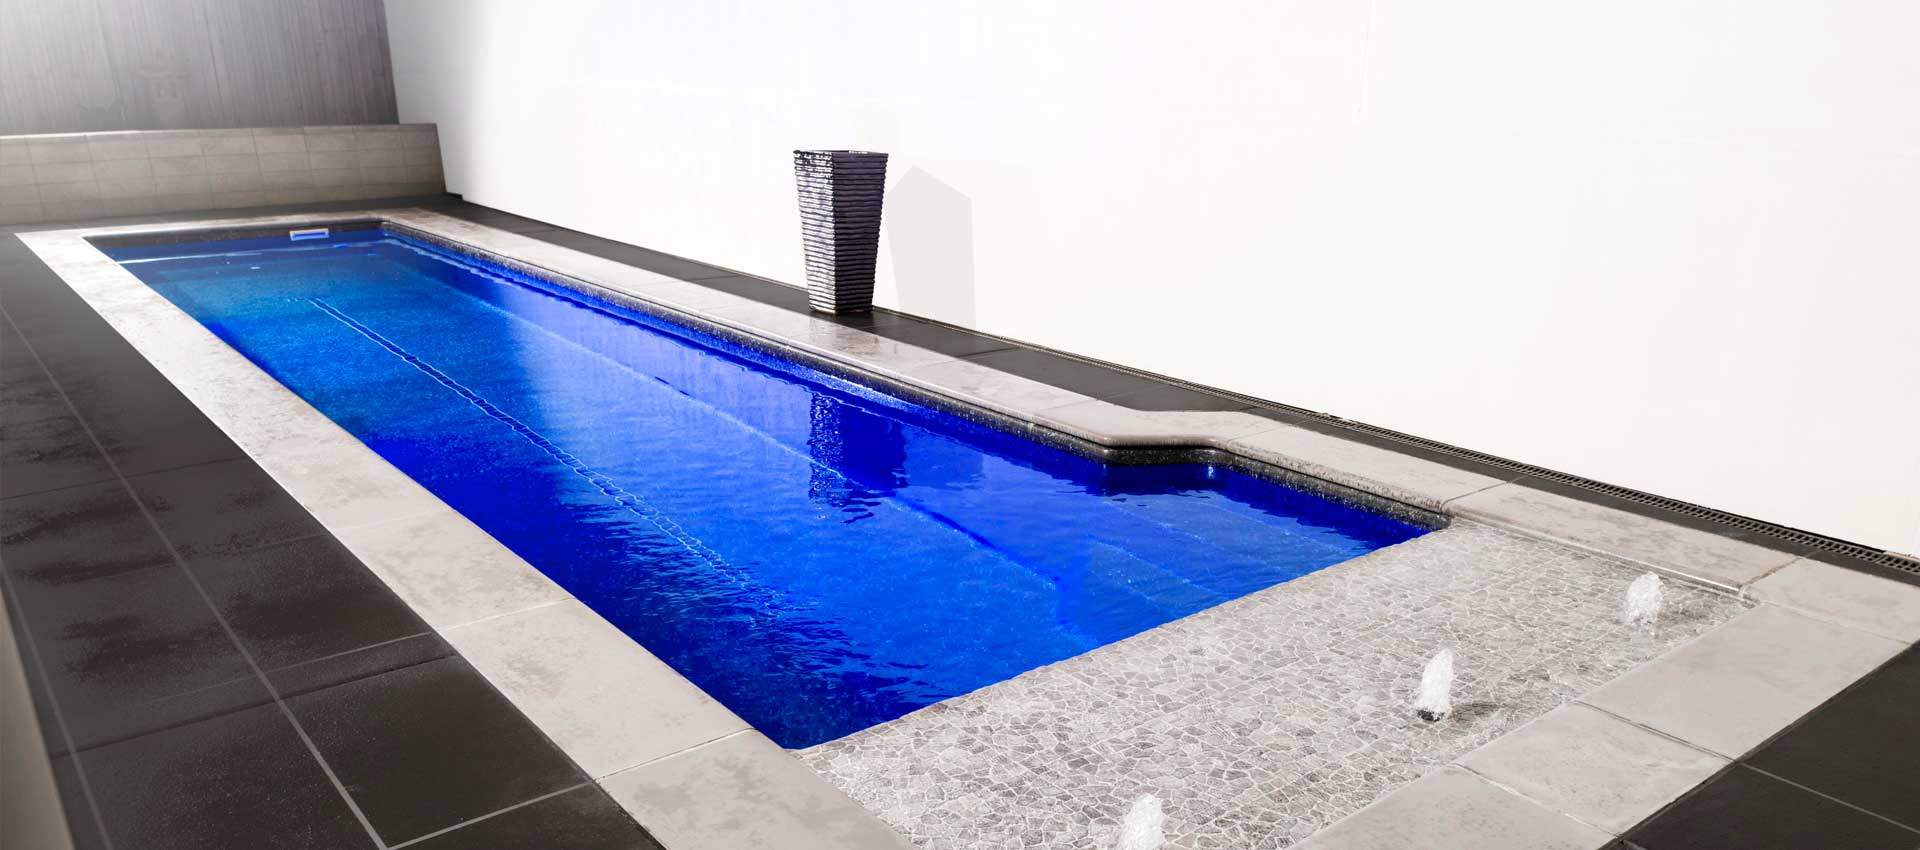 A pool for swimming at home